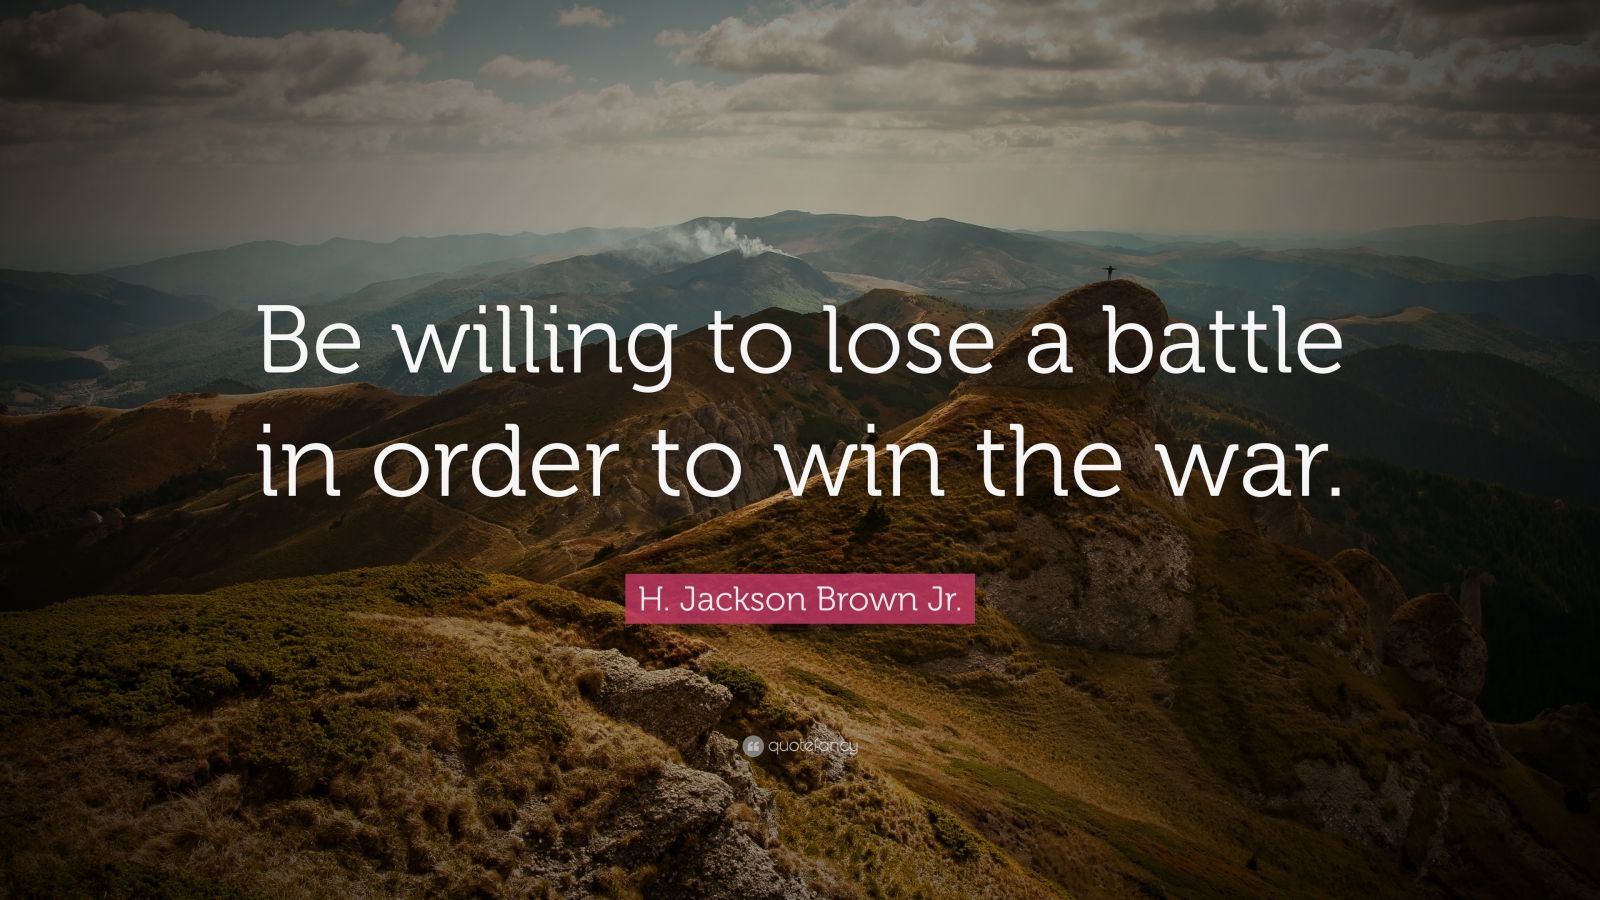 H. Jackson Brown Jr. Quote “Be willing to lose a battle